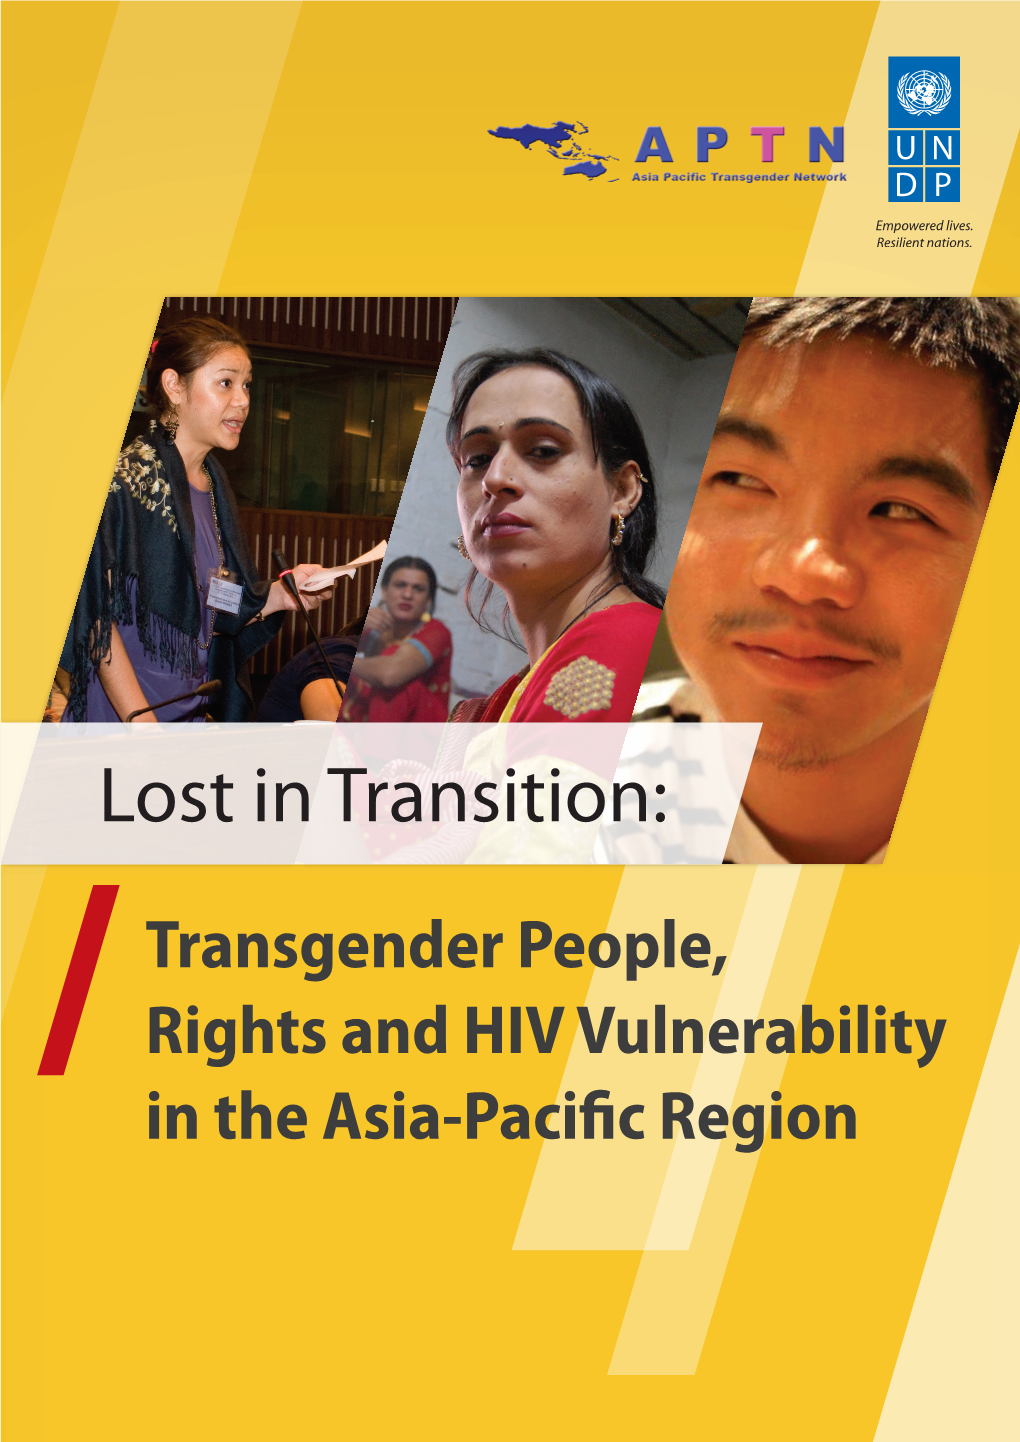 Lost in Transition: Transgender People, Rights and HIV Vulnerability in the Asia-Pacific Region